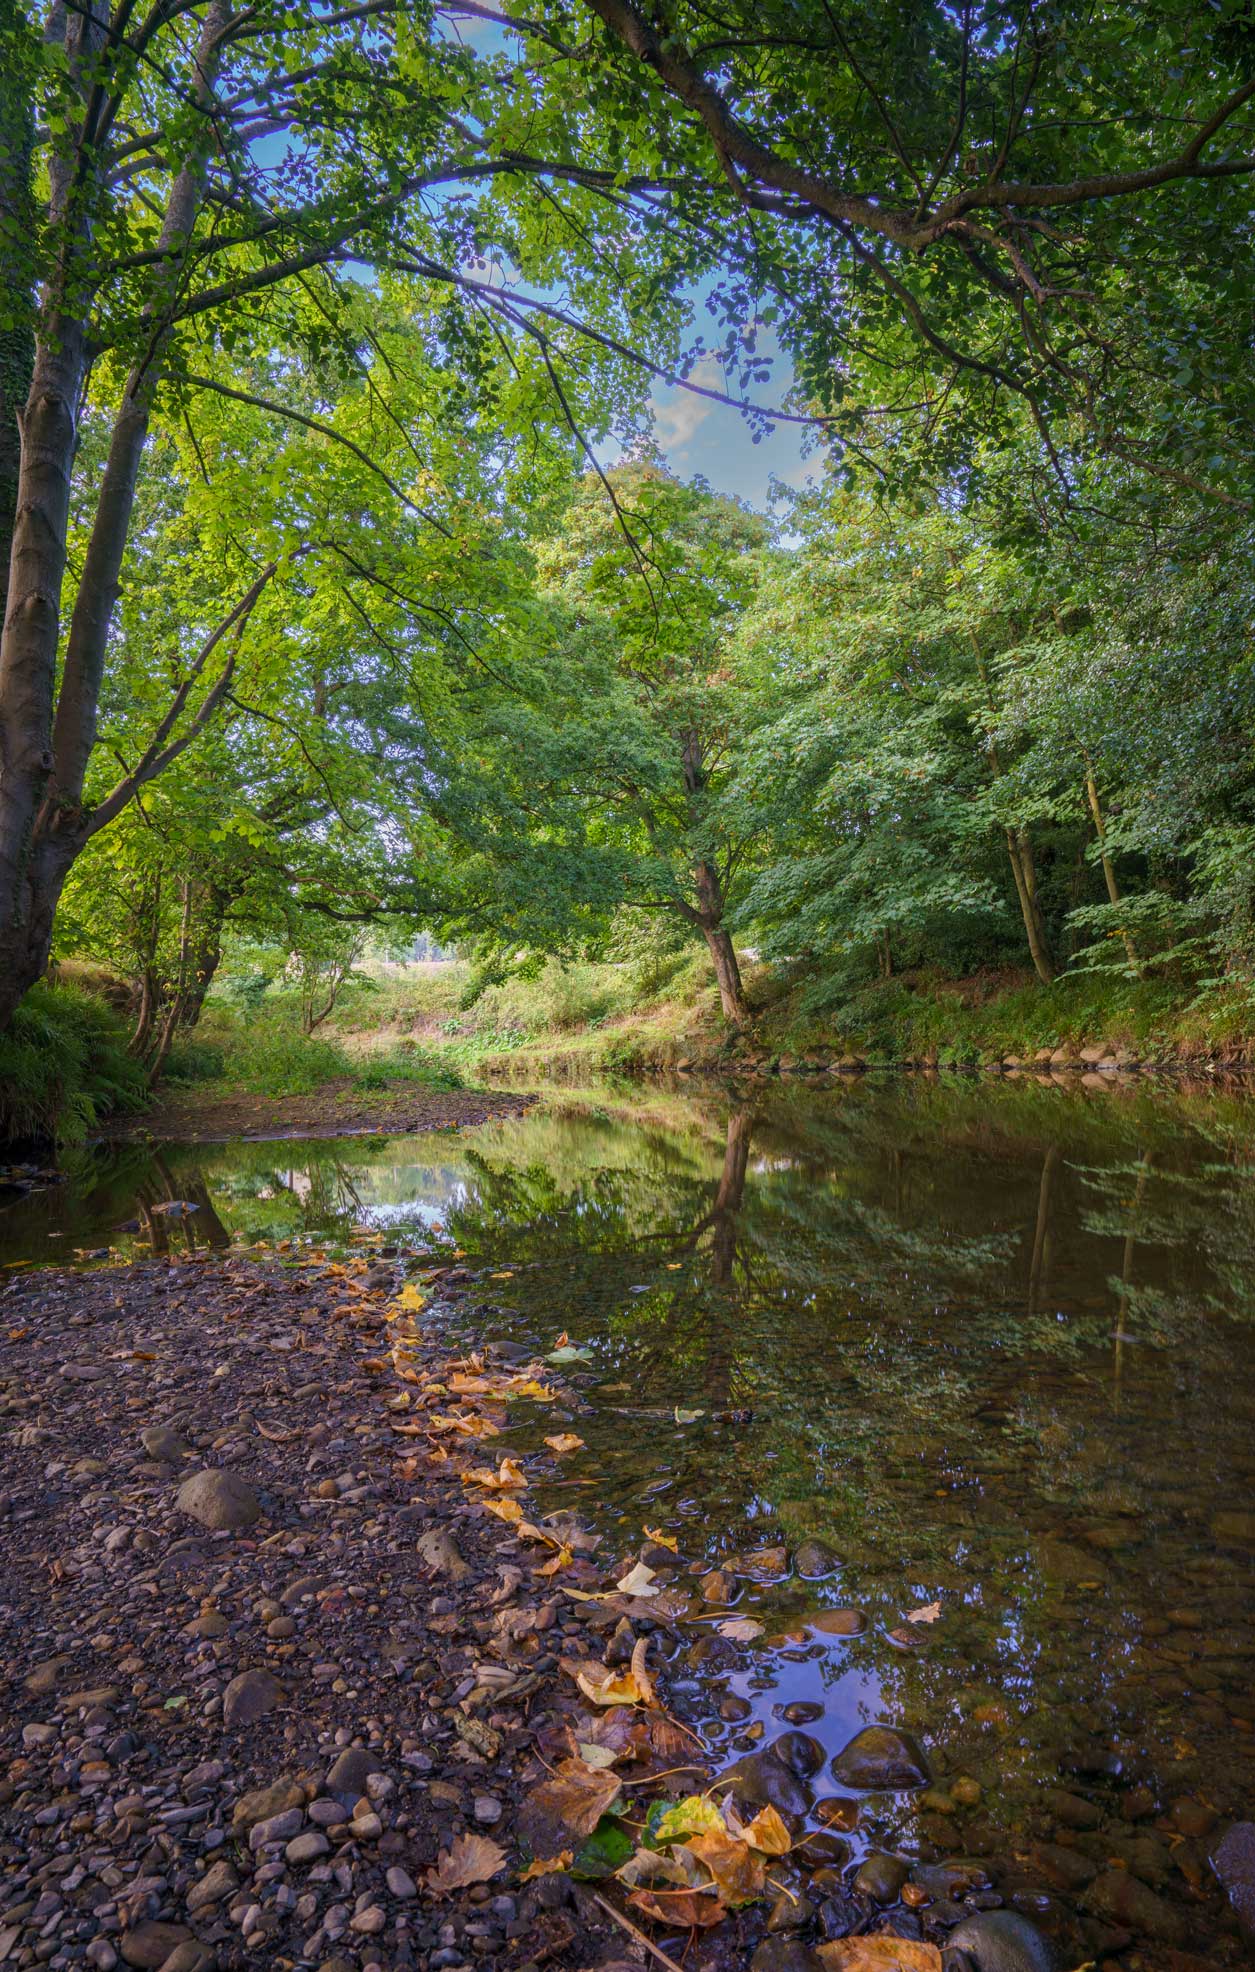 Grosmont Ford on the River Esk. Photo of a river running through woodland. Credit Oliver Sherratt